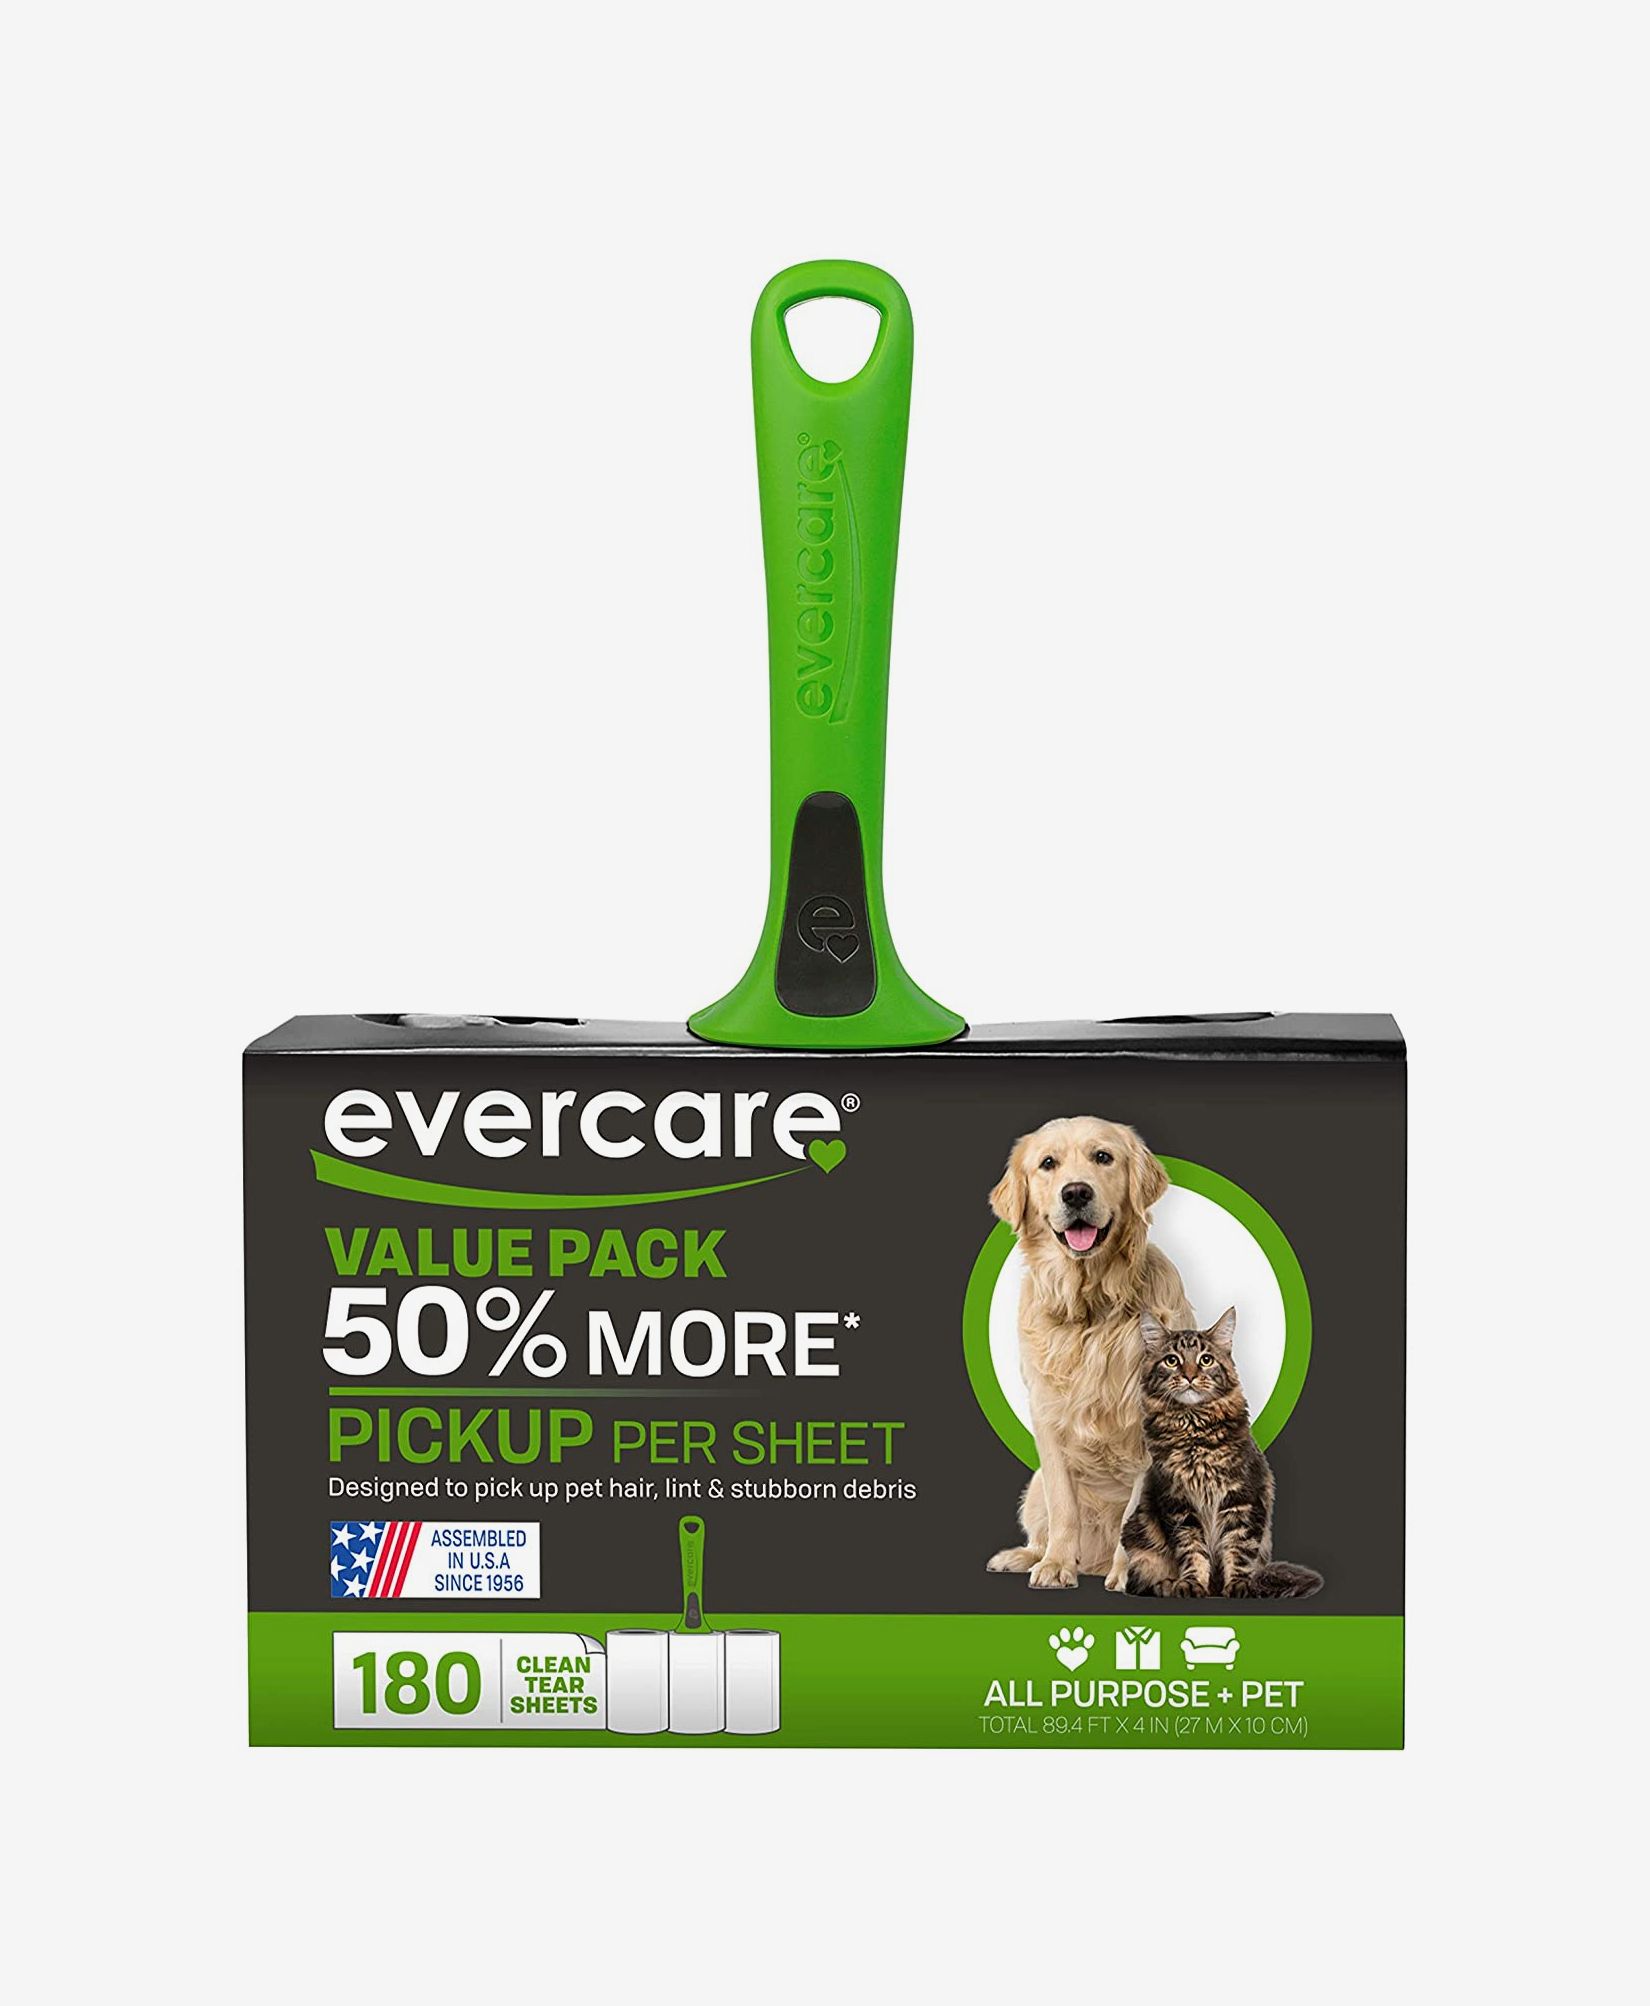 The 15 Best Pet-Safe Cleaning Products, According to Experts